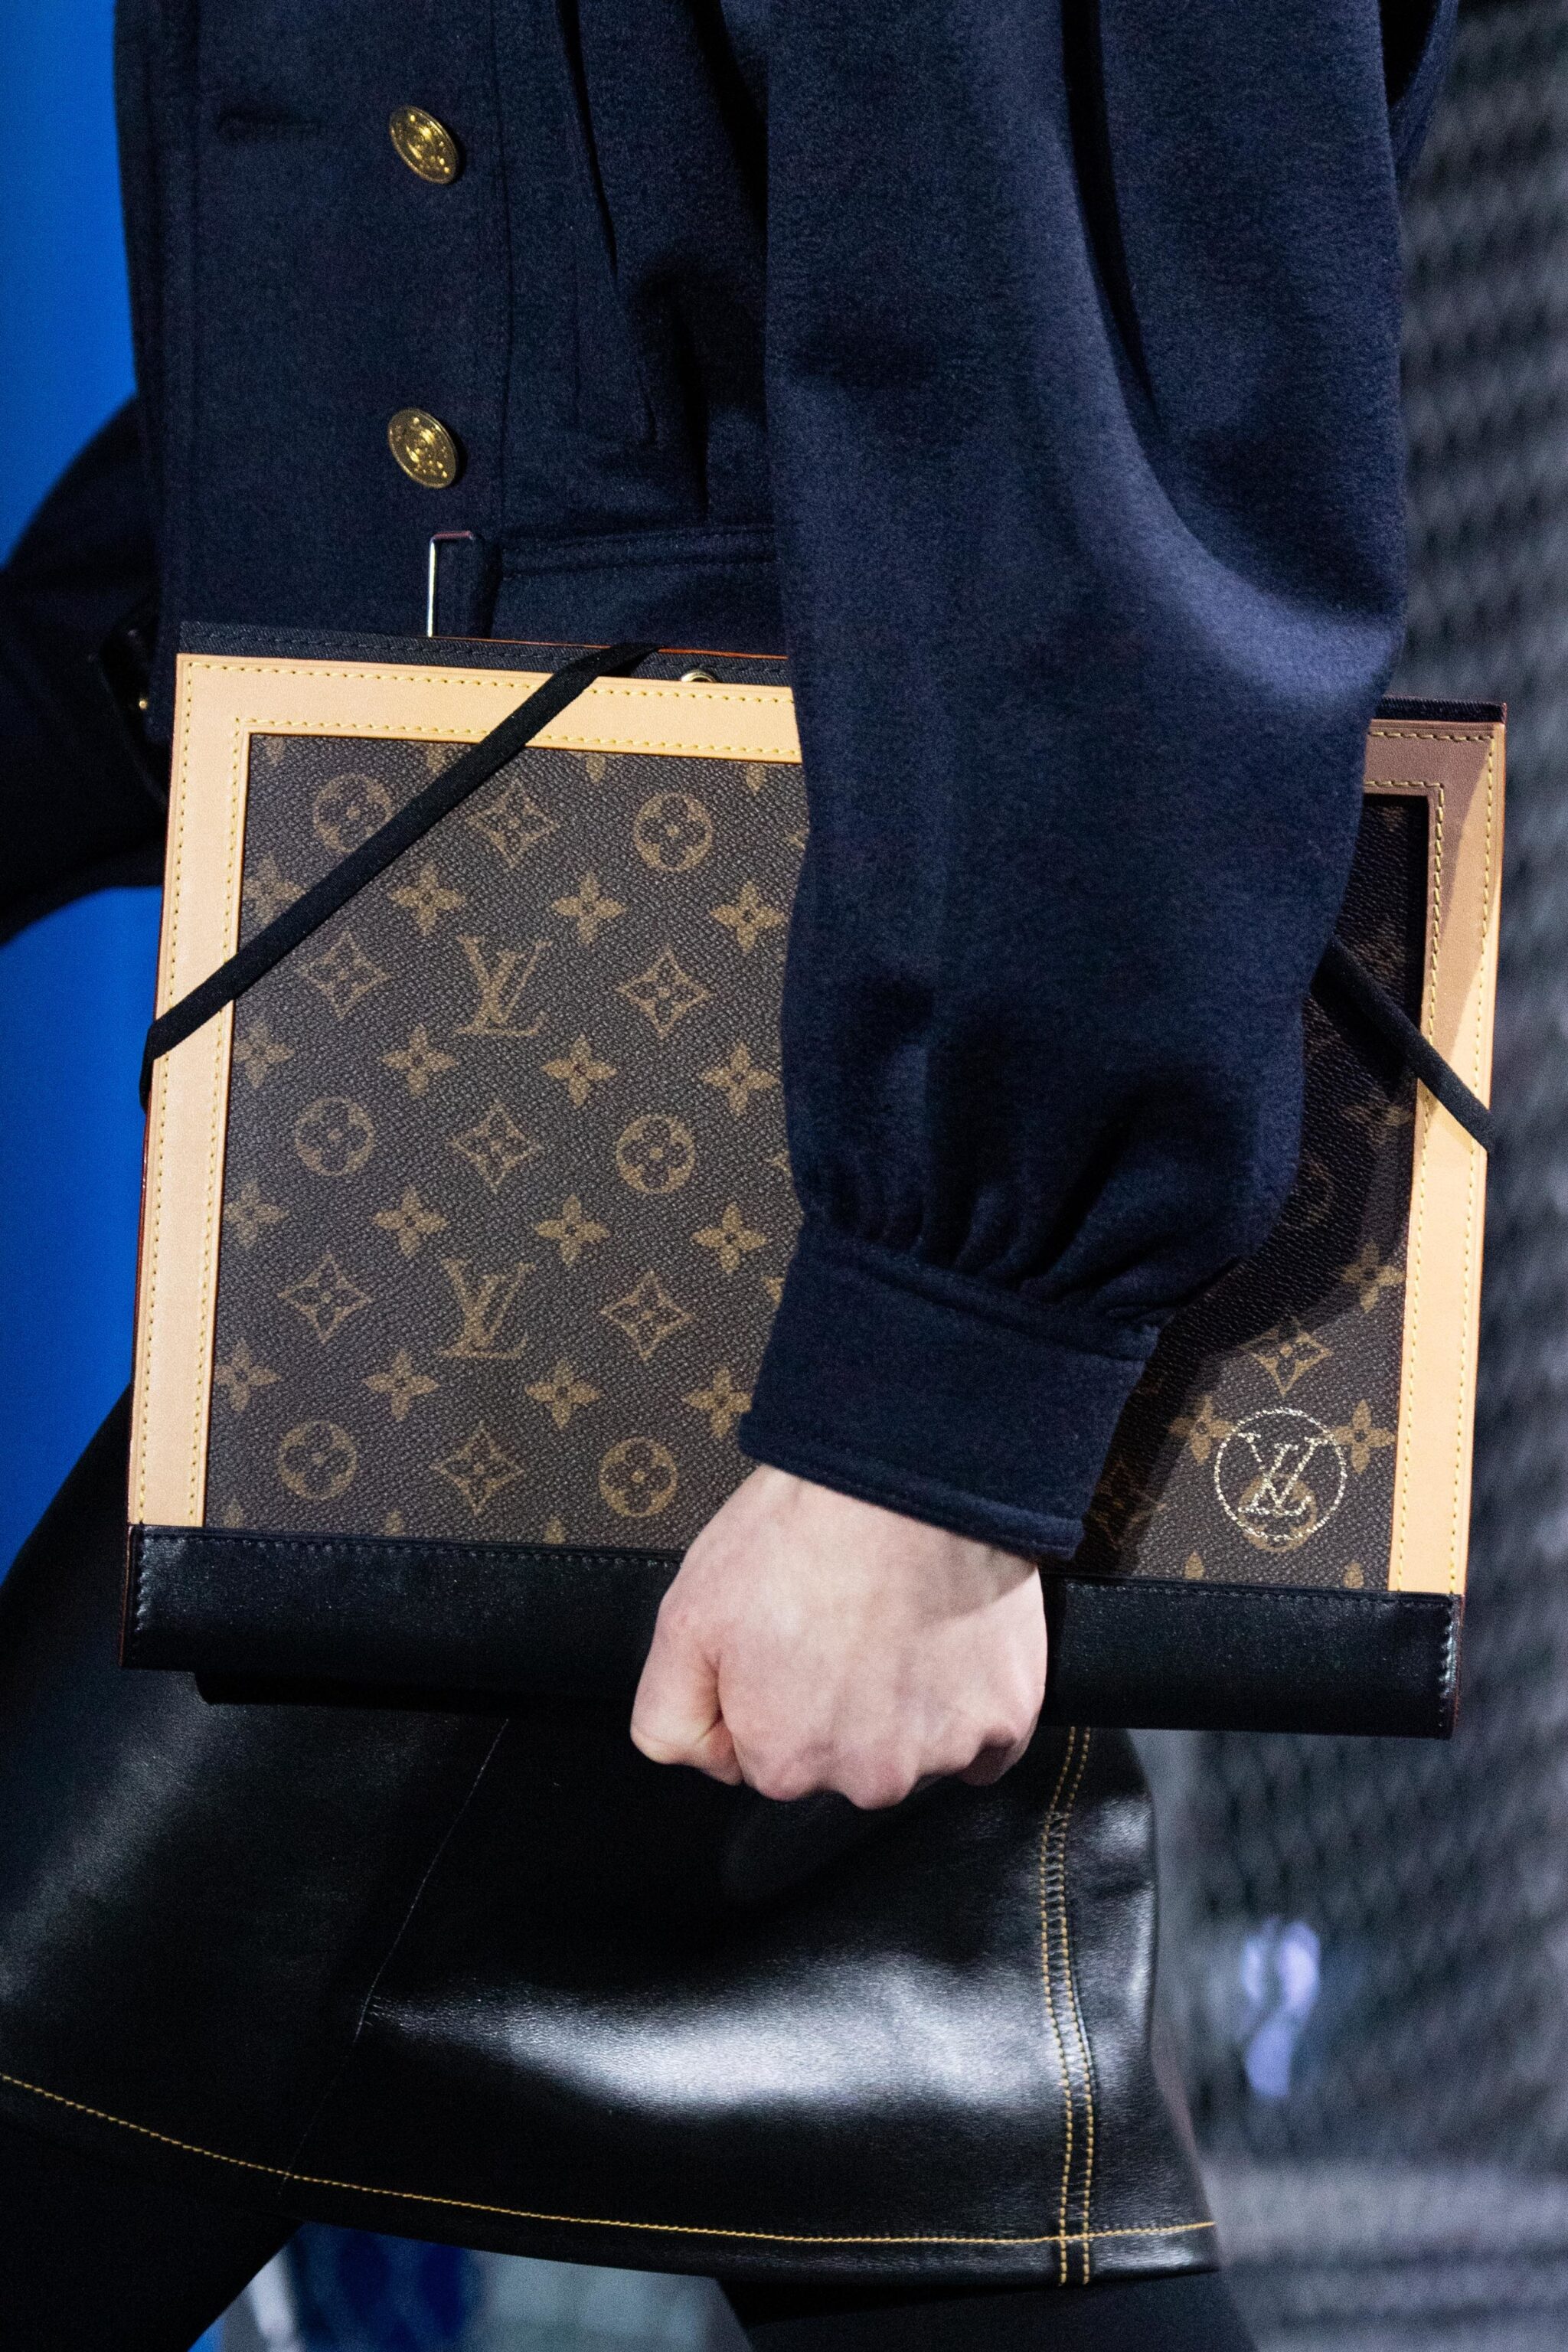 Louis #Vuitton #Handbags My#fashion style,2019 New LV Collection for Louis  Vuitton. #MurakamiSologneBag